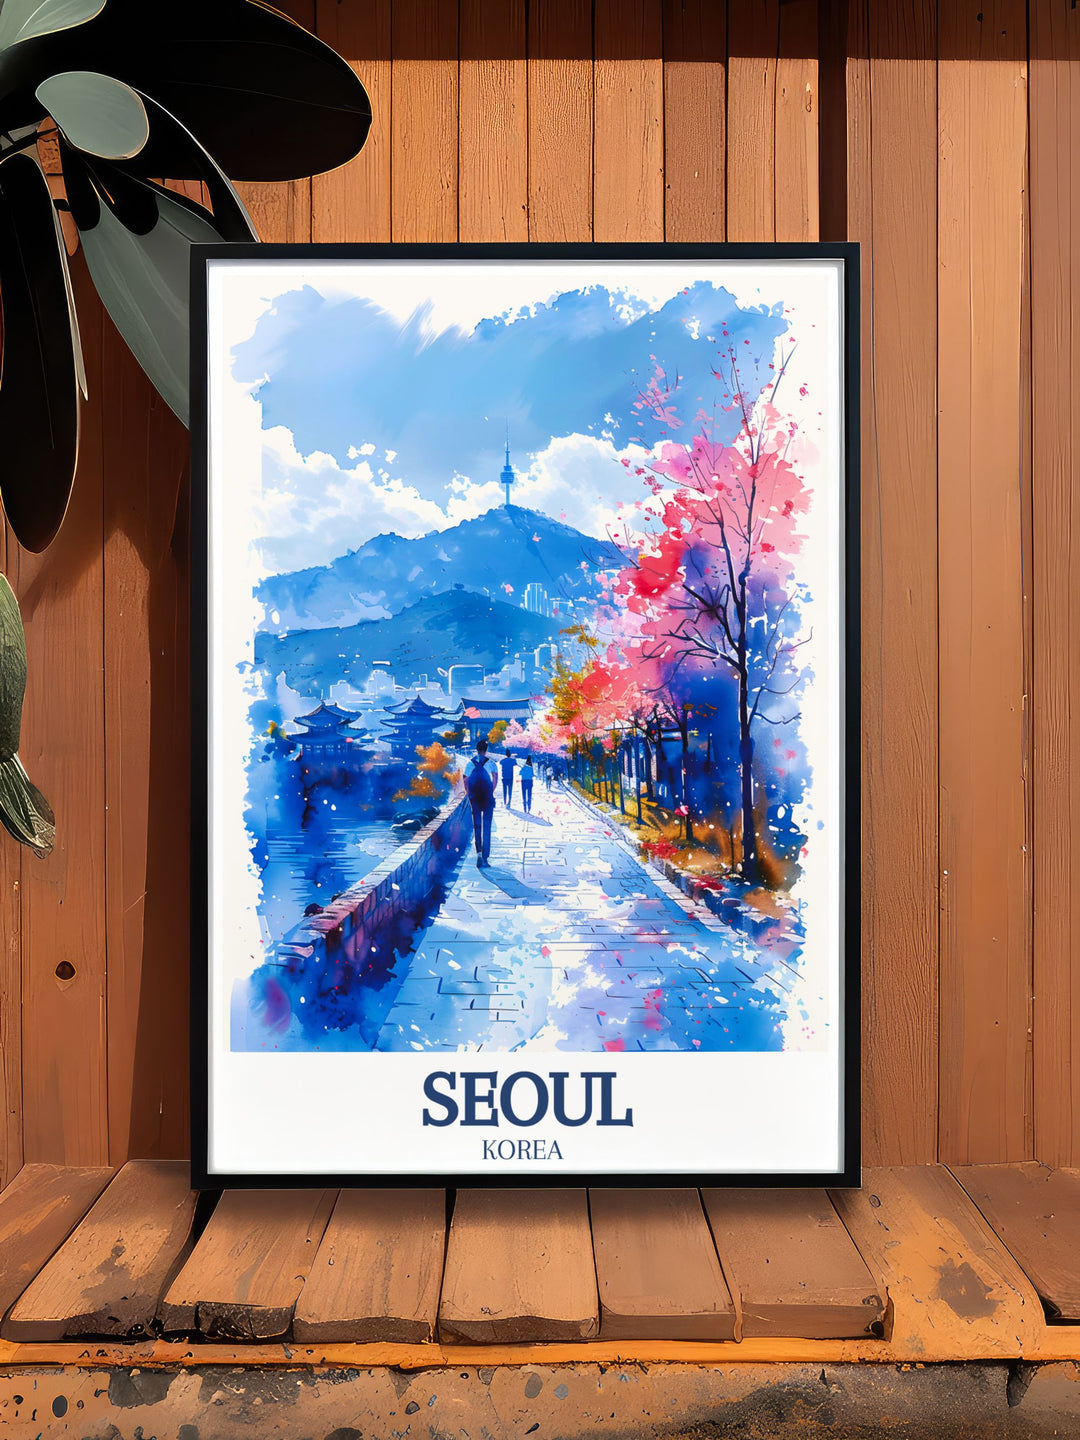 Elegant Seoul Wall Art featuring N Seoul Tower and Bukchon Hanok Village capturing the essence of Seouls vibrant city life and serene landscapes perfect for home decor and thoughtful gifts for any occasion